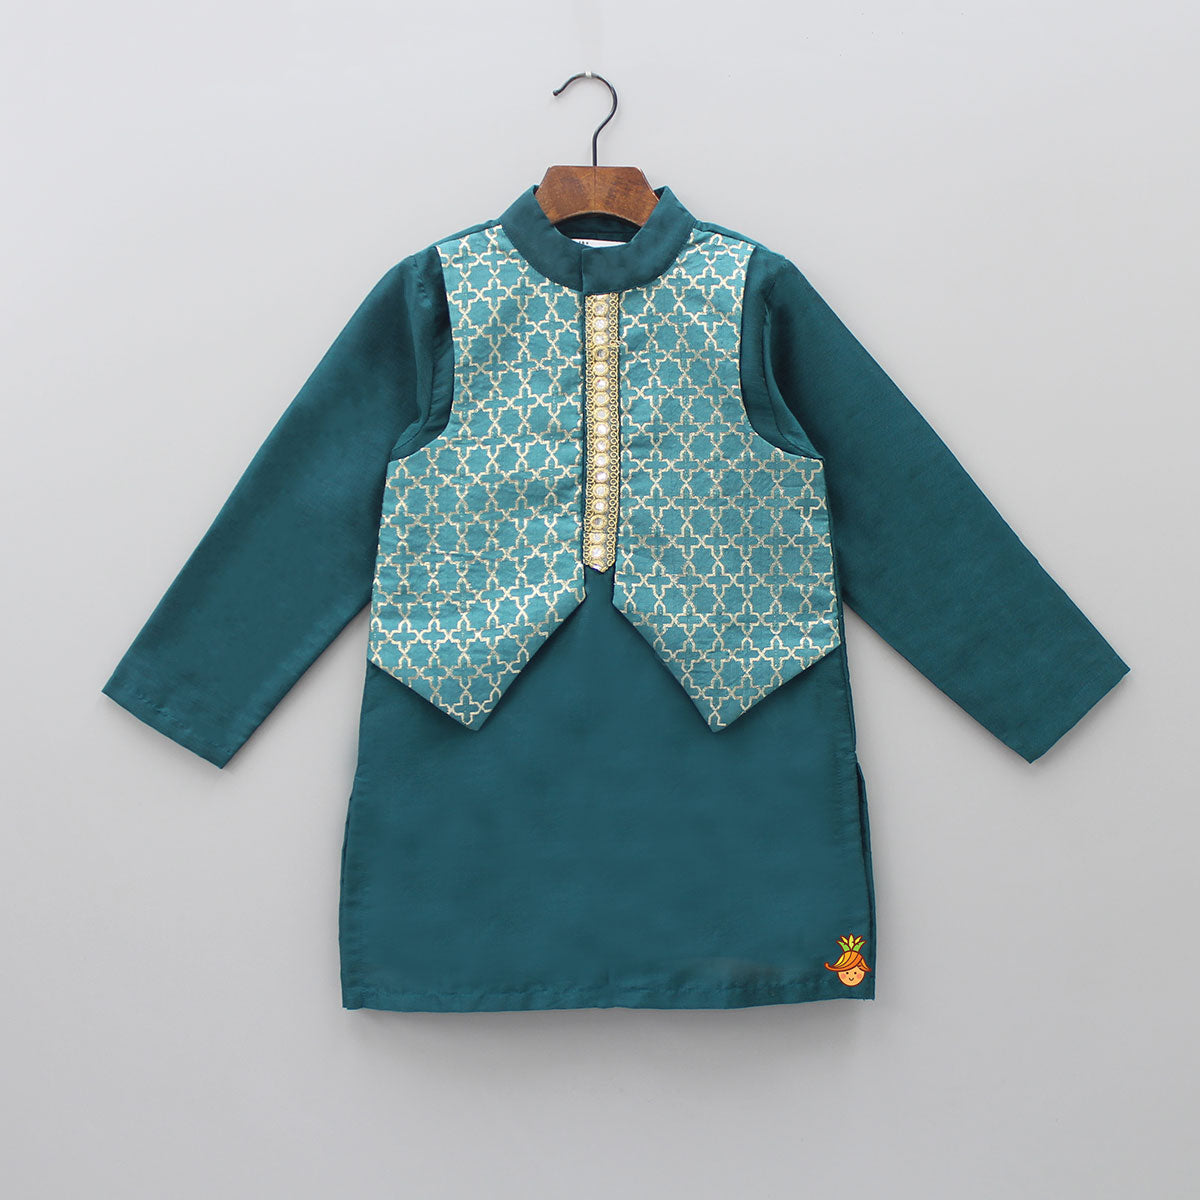 Bottle Green Kurta With Attached Jacket And Pyjama